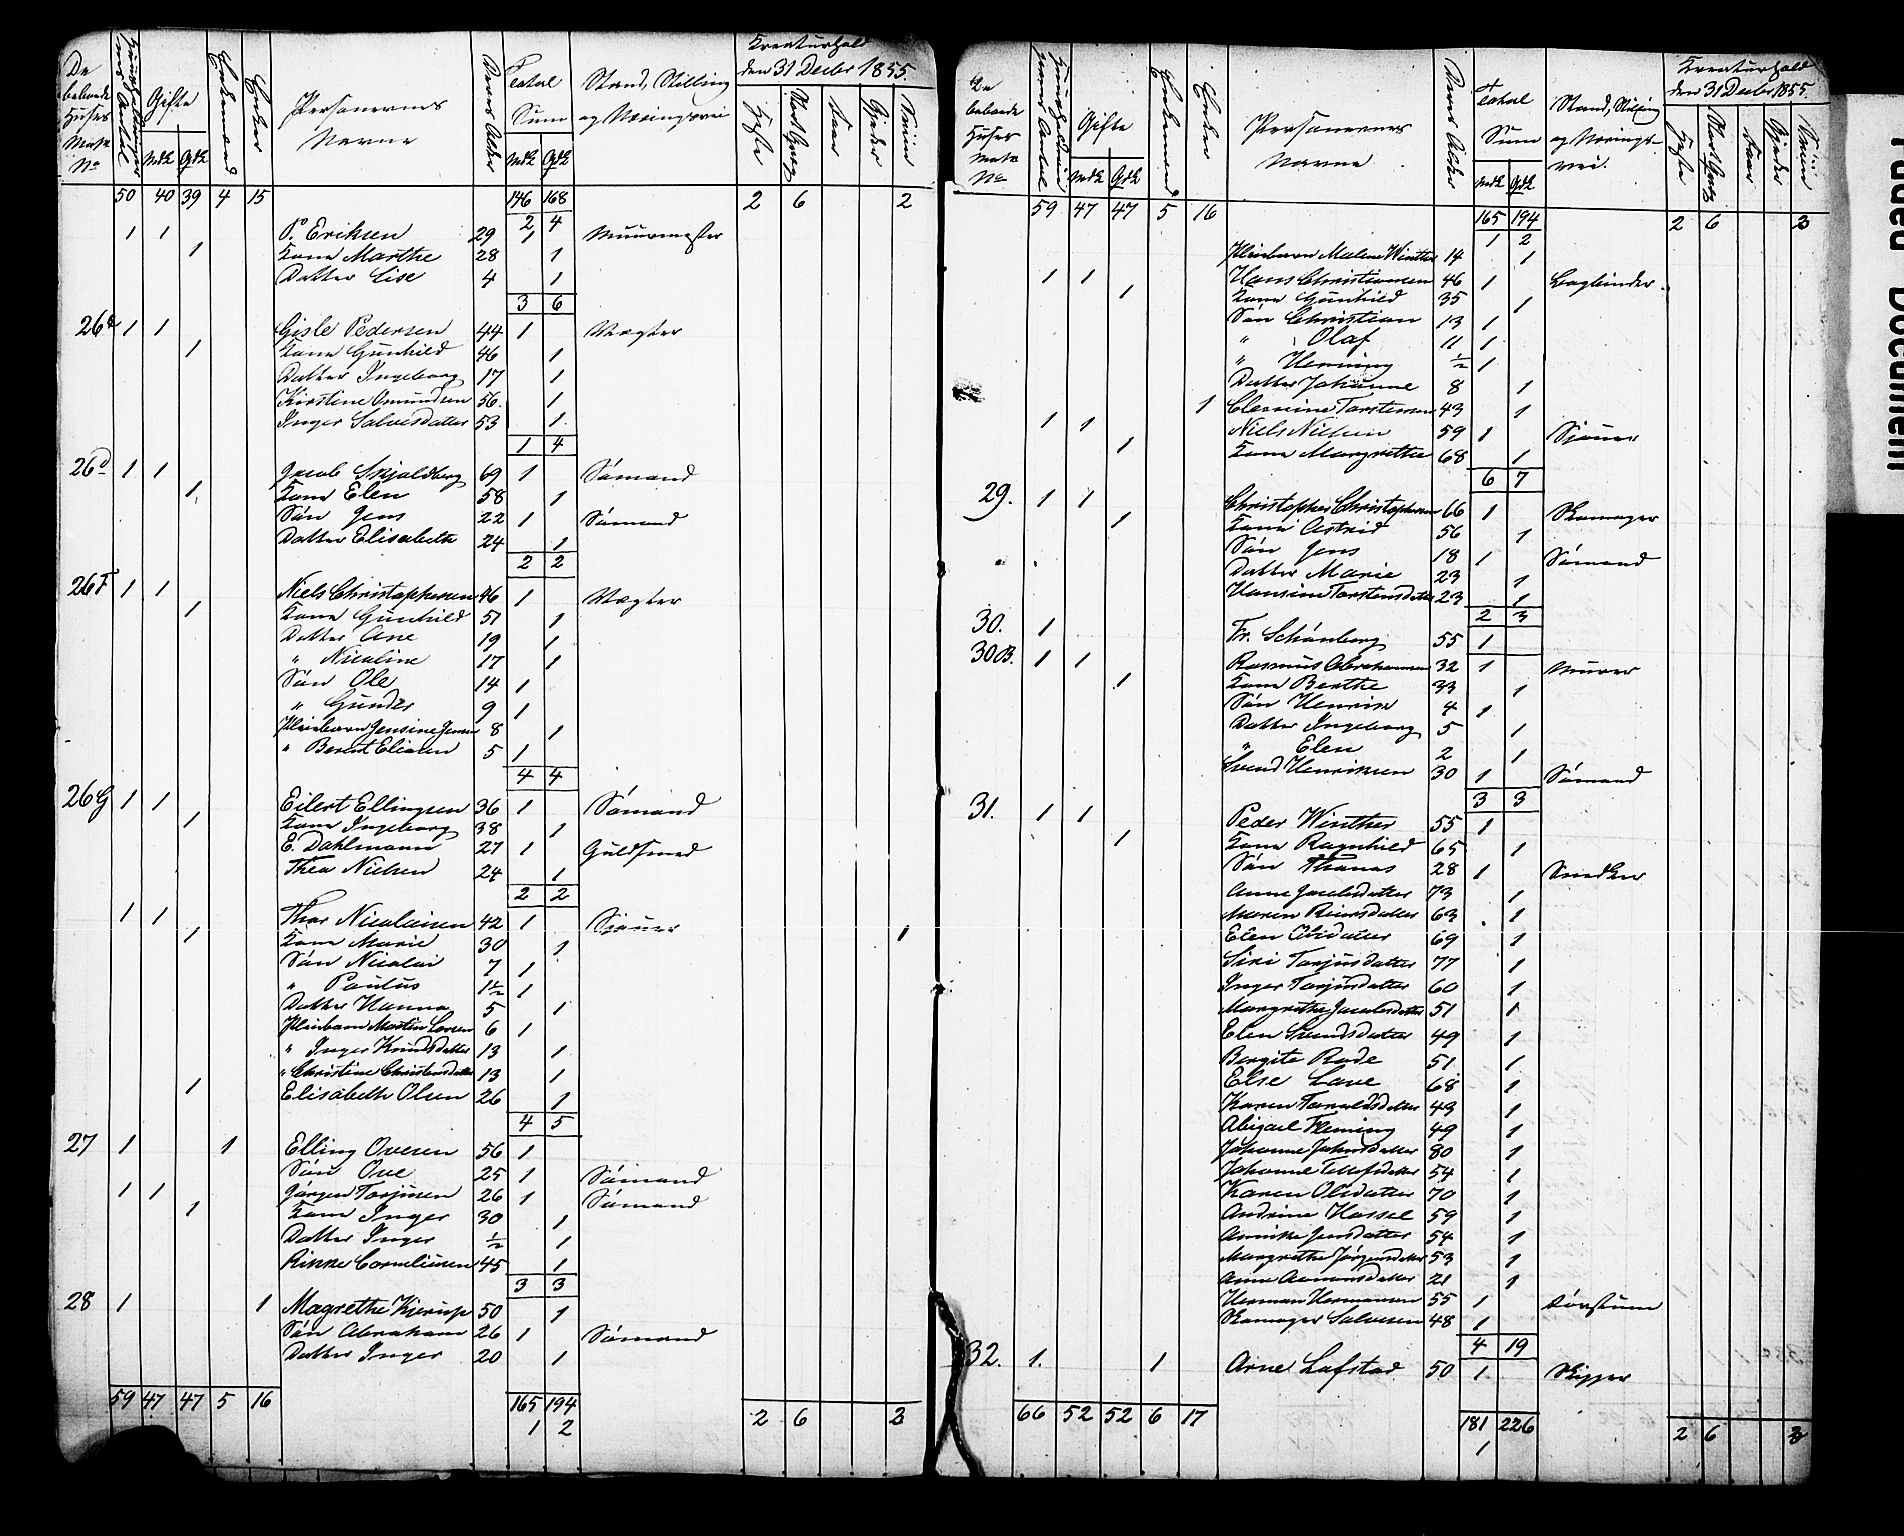 , Census 1855 for Arendal, 1855, p. 6